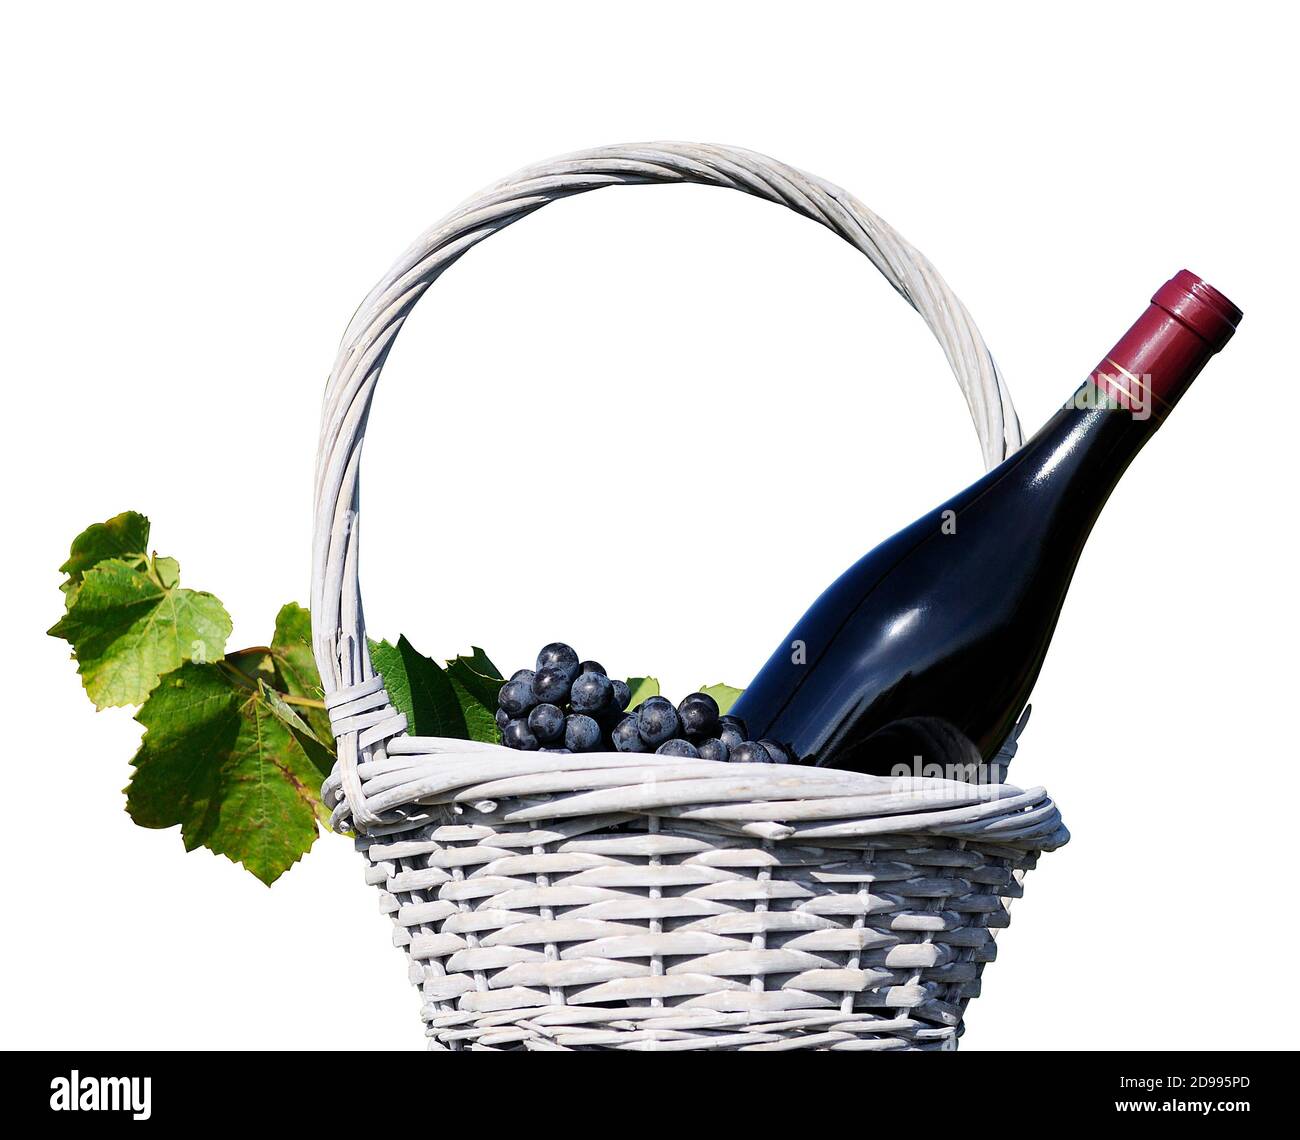 Page 2 - Vendanges High Resolution Stock Photography and Images - Alamy